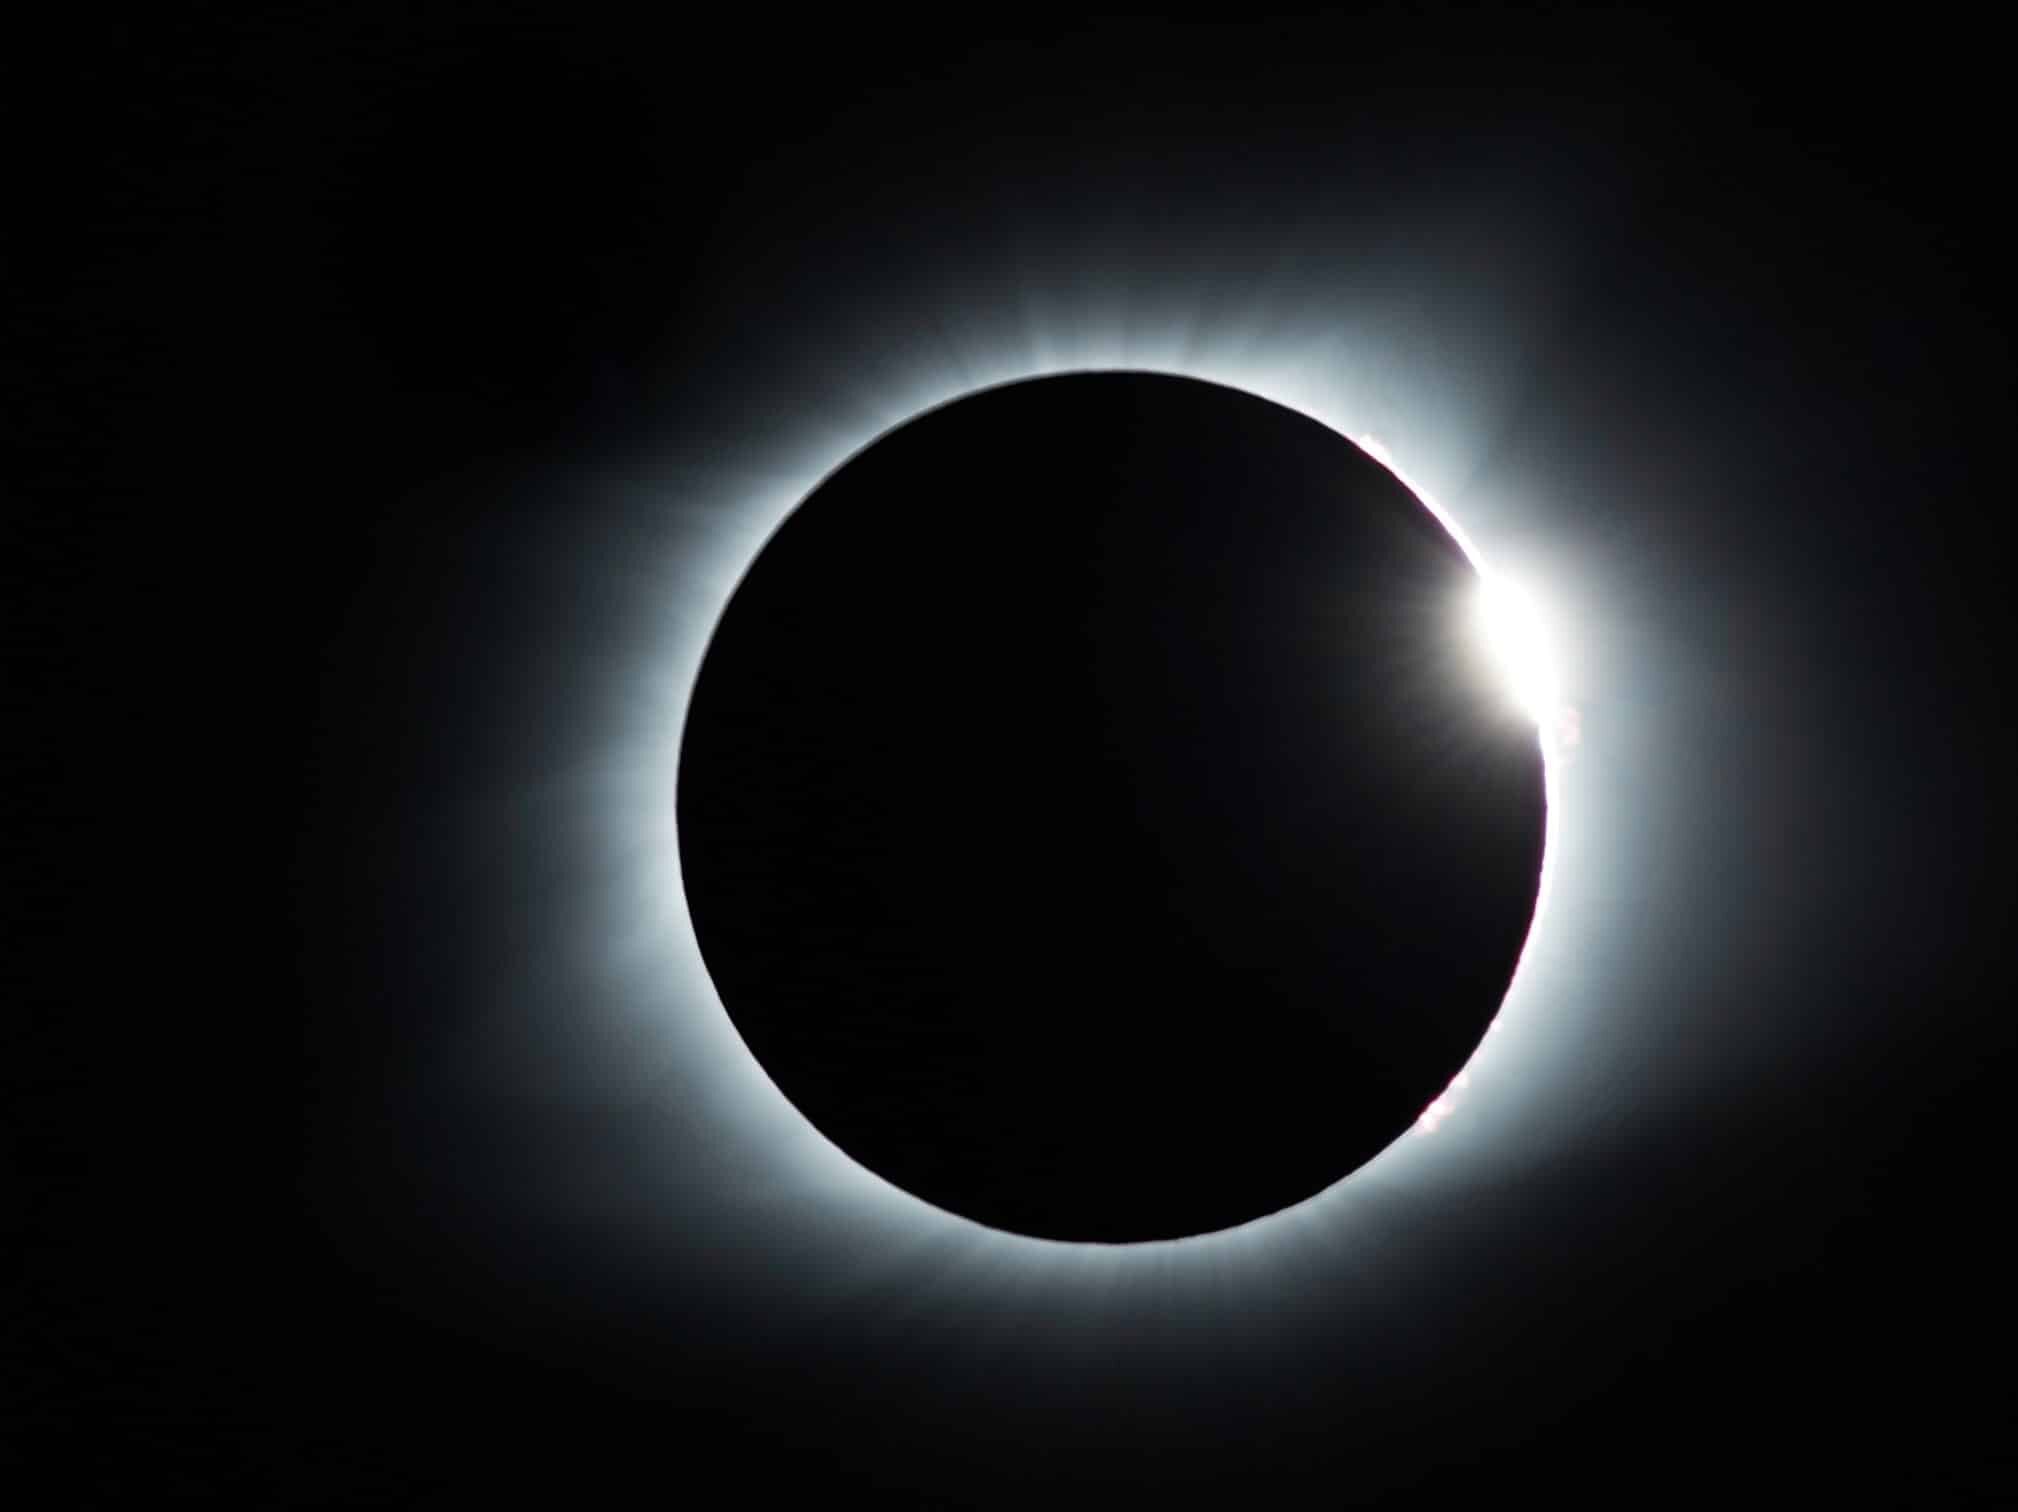 Taken in Kentucky during the 2017 August Total Eclipse.